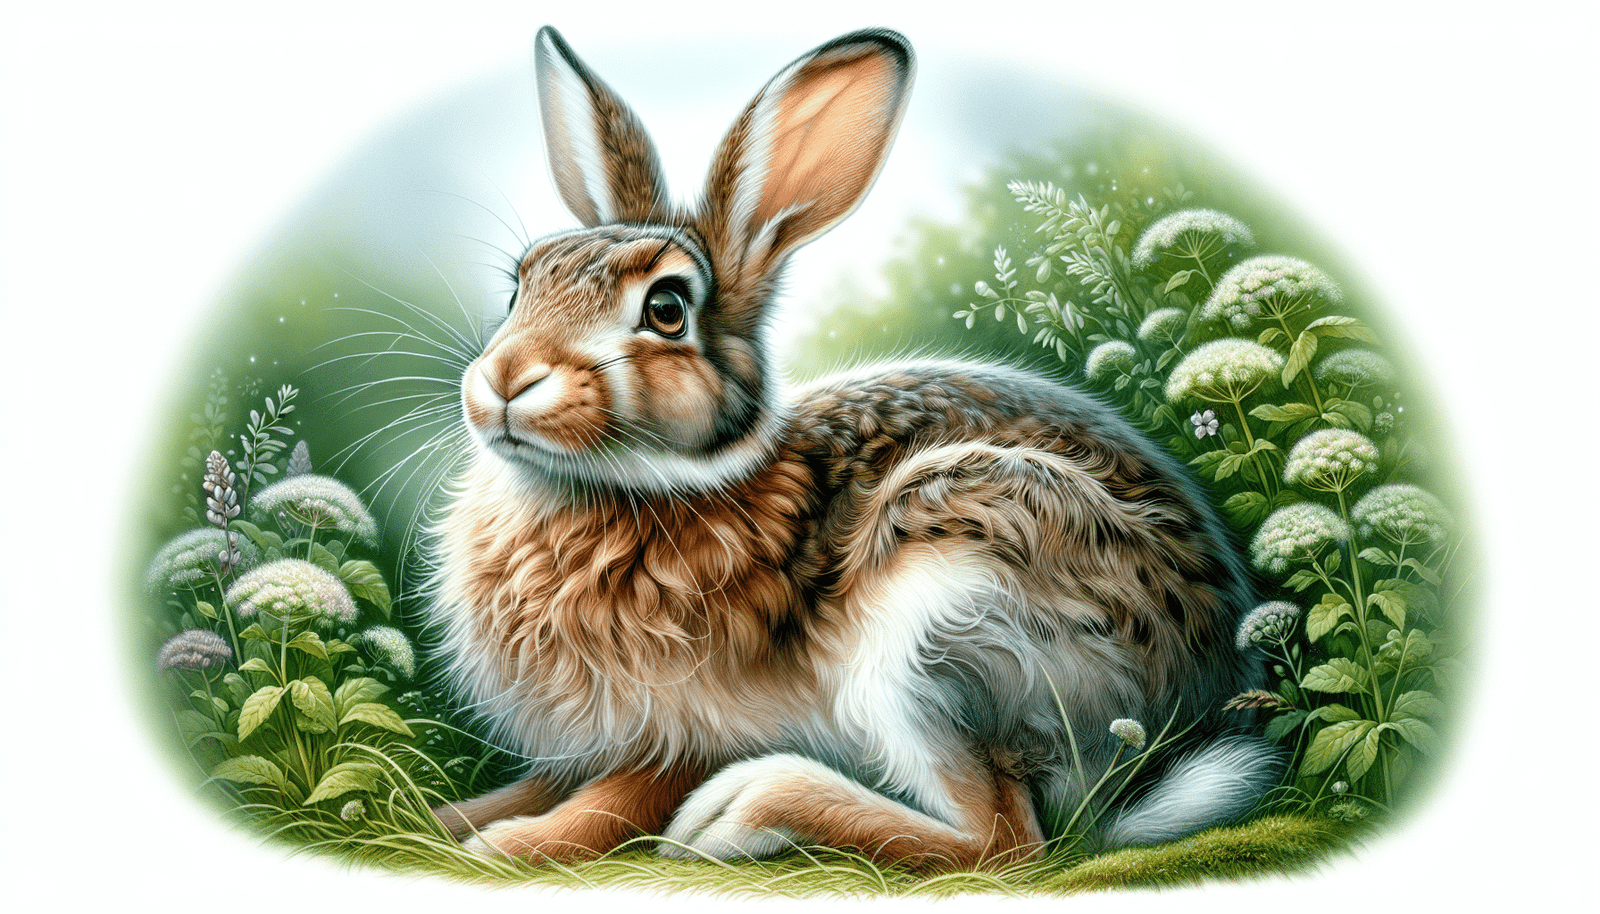 Illustration of a female rabbit called a doe